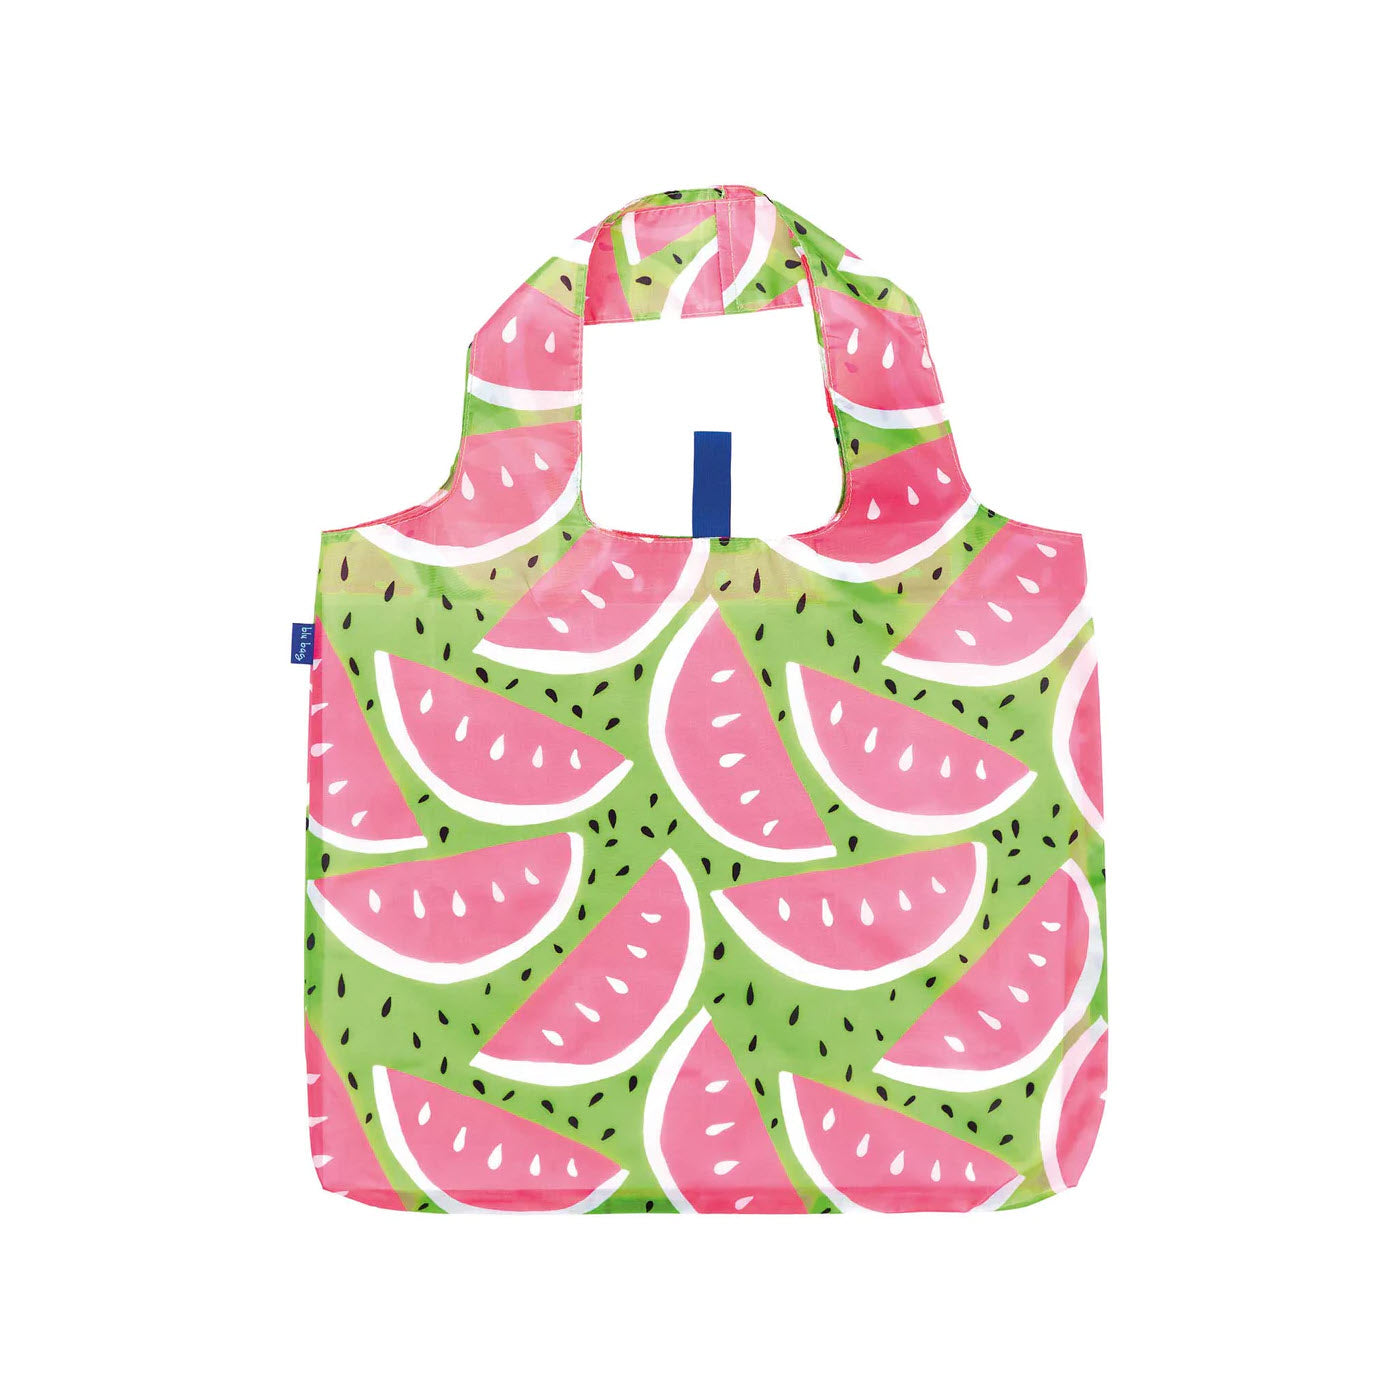 Replace the product in the sentence with: Rockflowerpaper BLU BAG WATERMELON with vibrant watermelon slice print on a white background, featuring integrated handles.